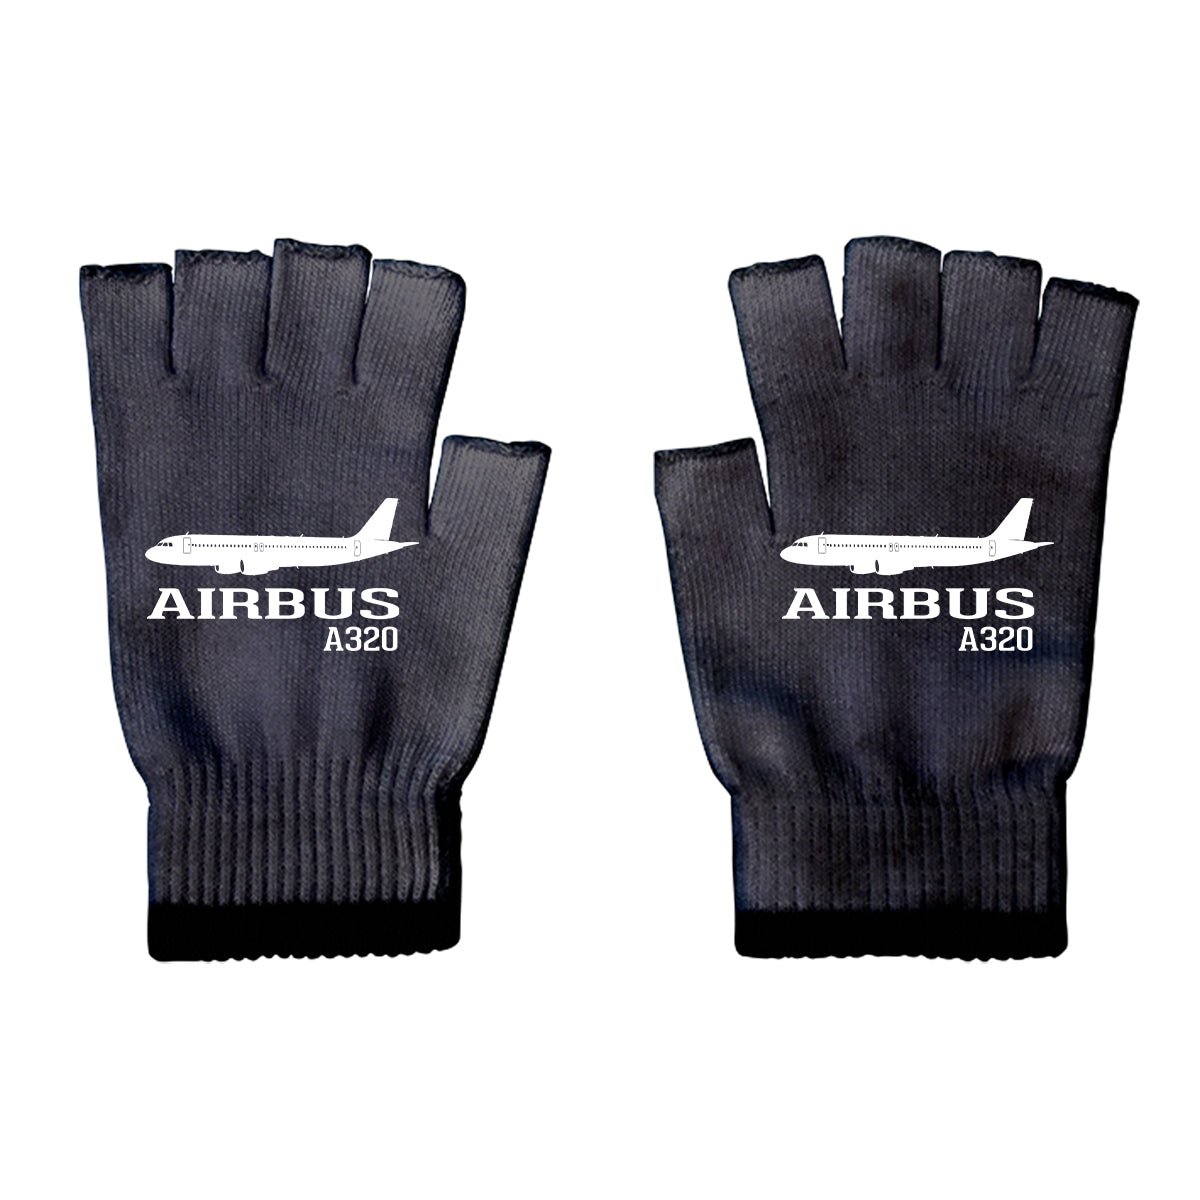 Airbus A320 Printed Designed Cut Gloves